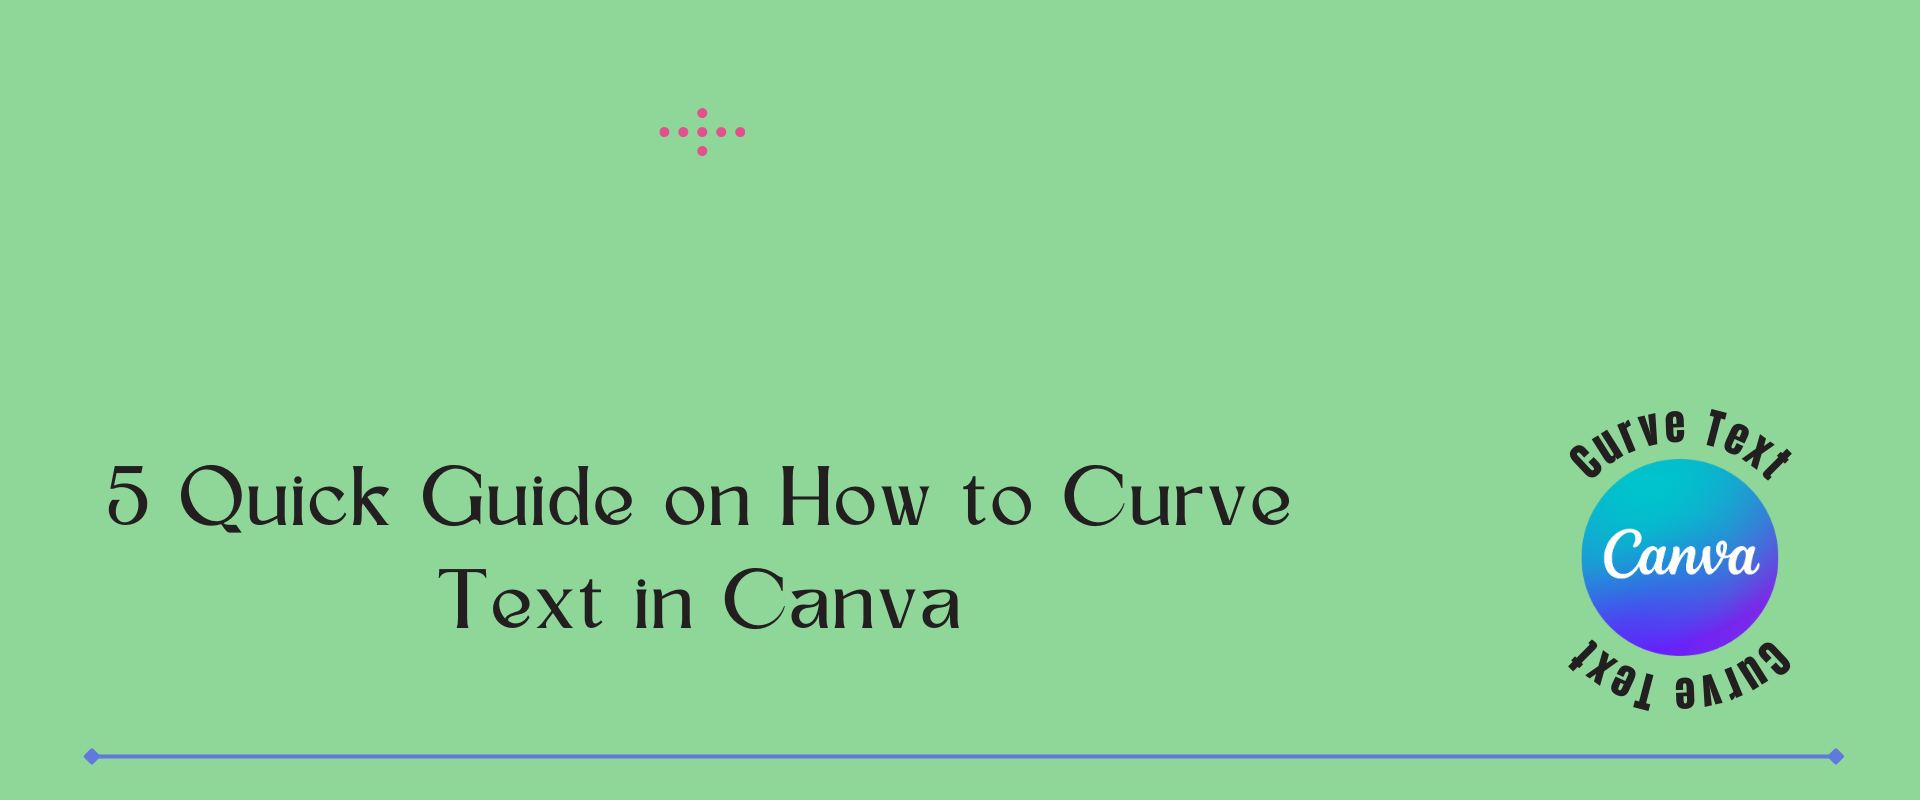 how to curve text in canva